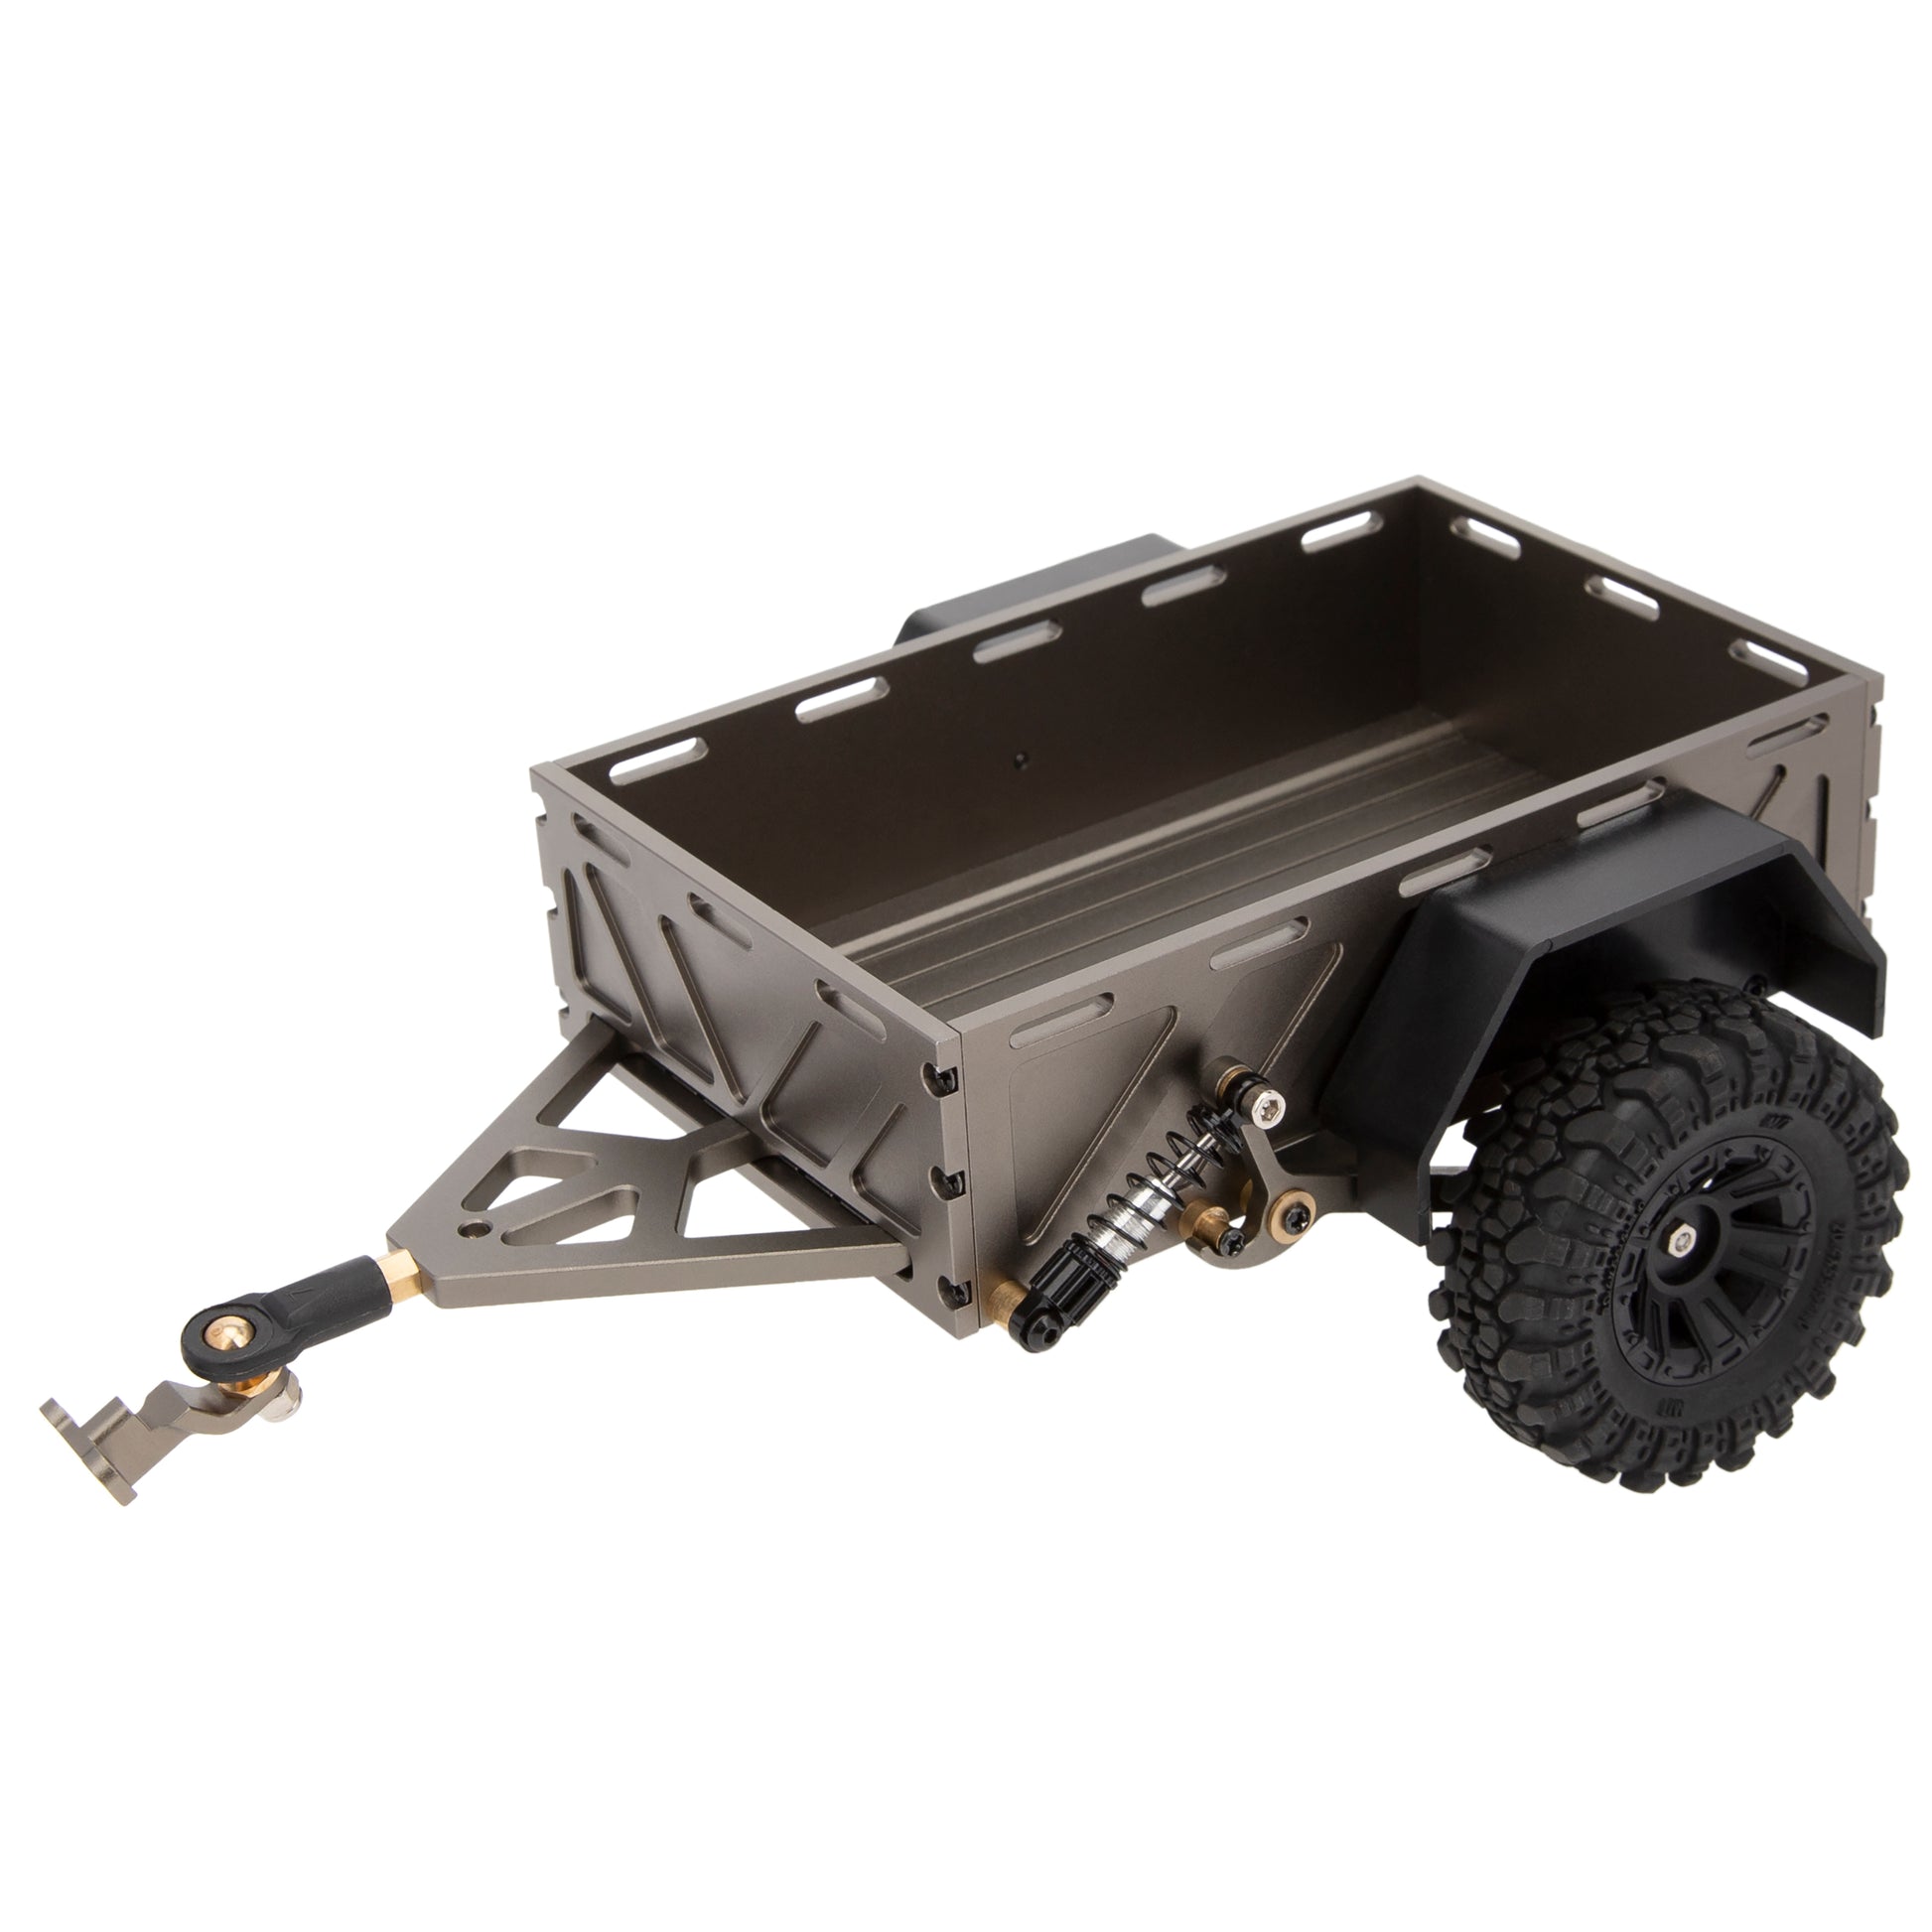 Coffee Utility trailer car with hitch for TRX4M